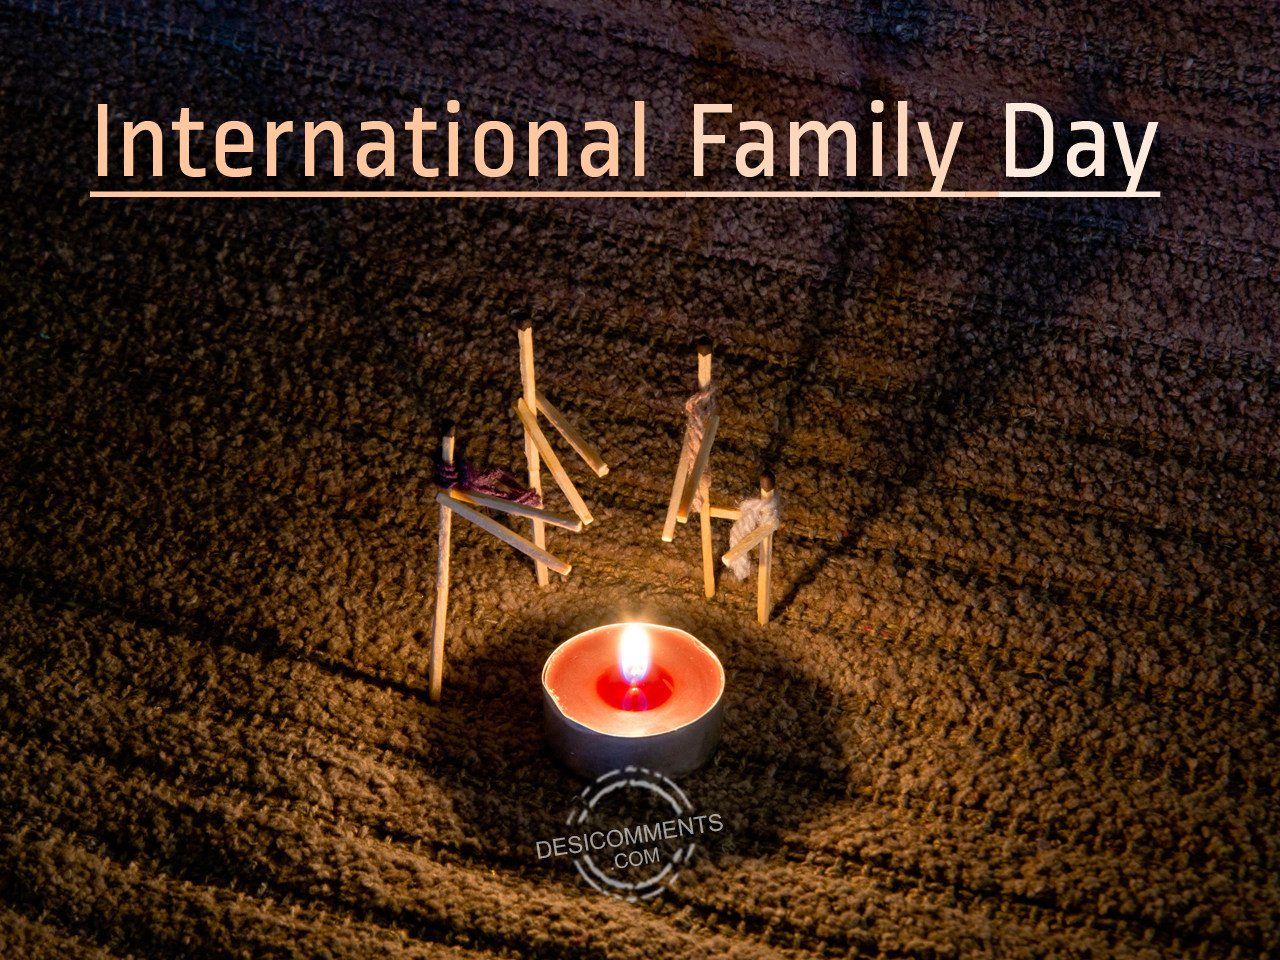 International Family Day Pictures, Images, Graphics for Facebook, Whatsapp